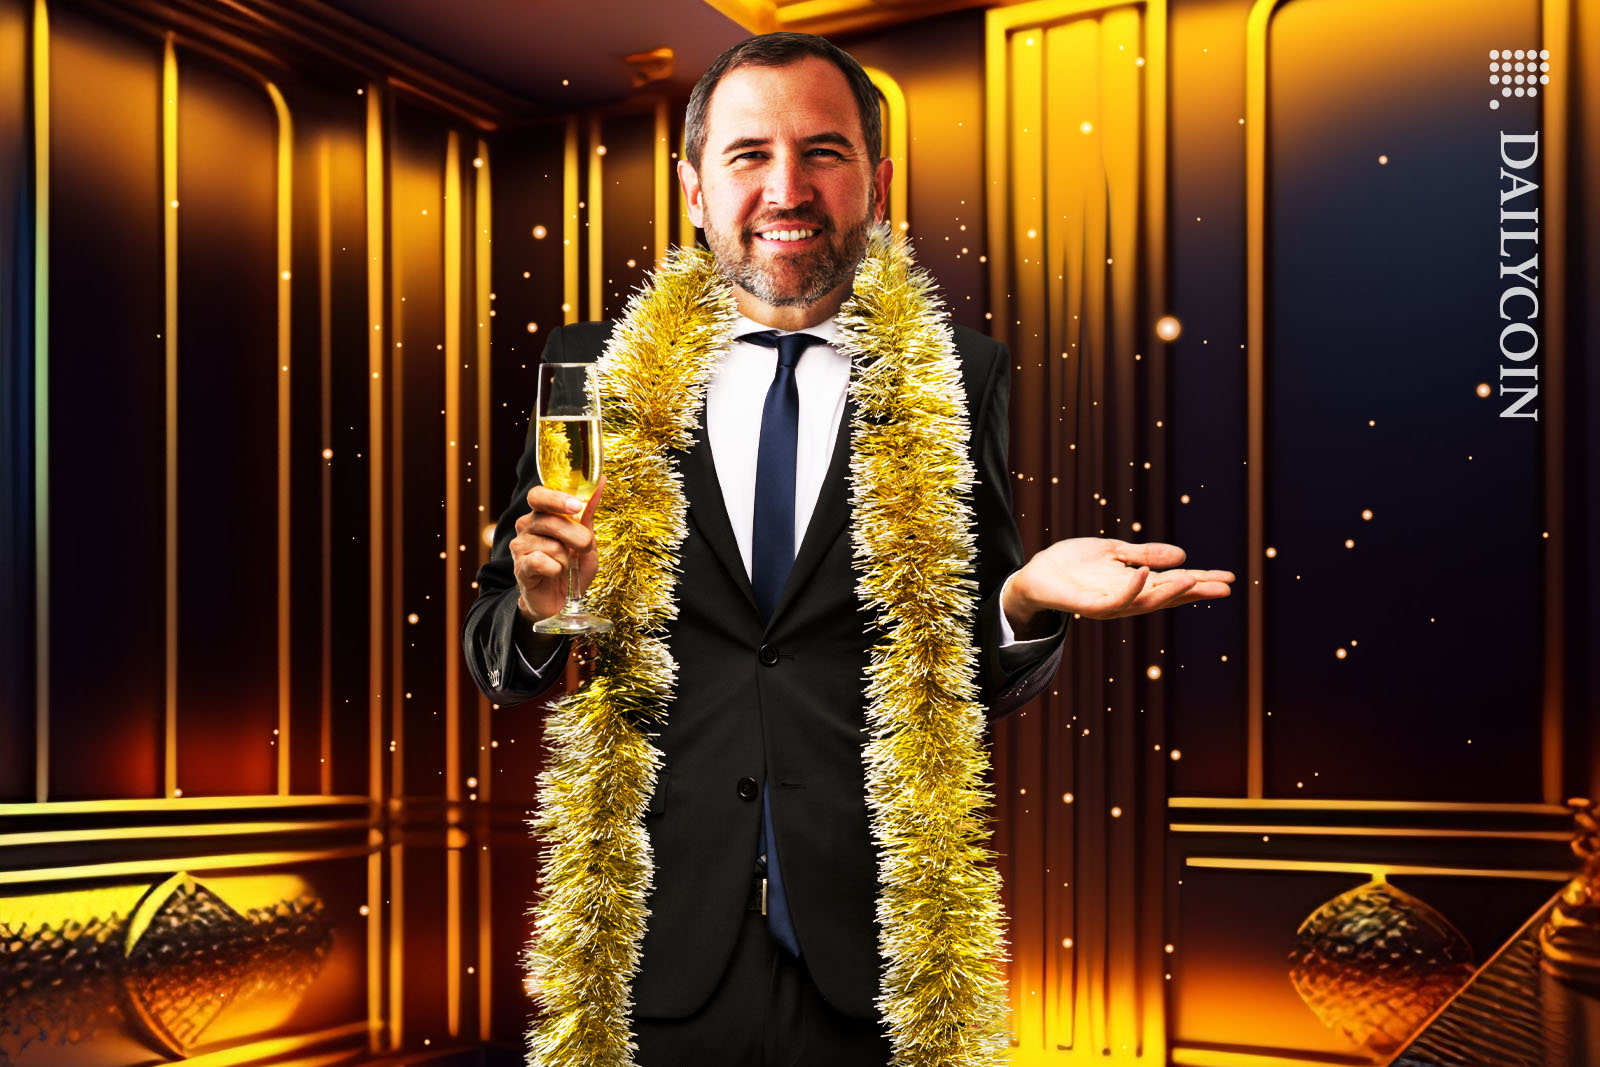 Brad Garlinghouse celebrating with a glass of Champagne in a golden room.